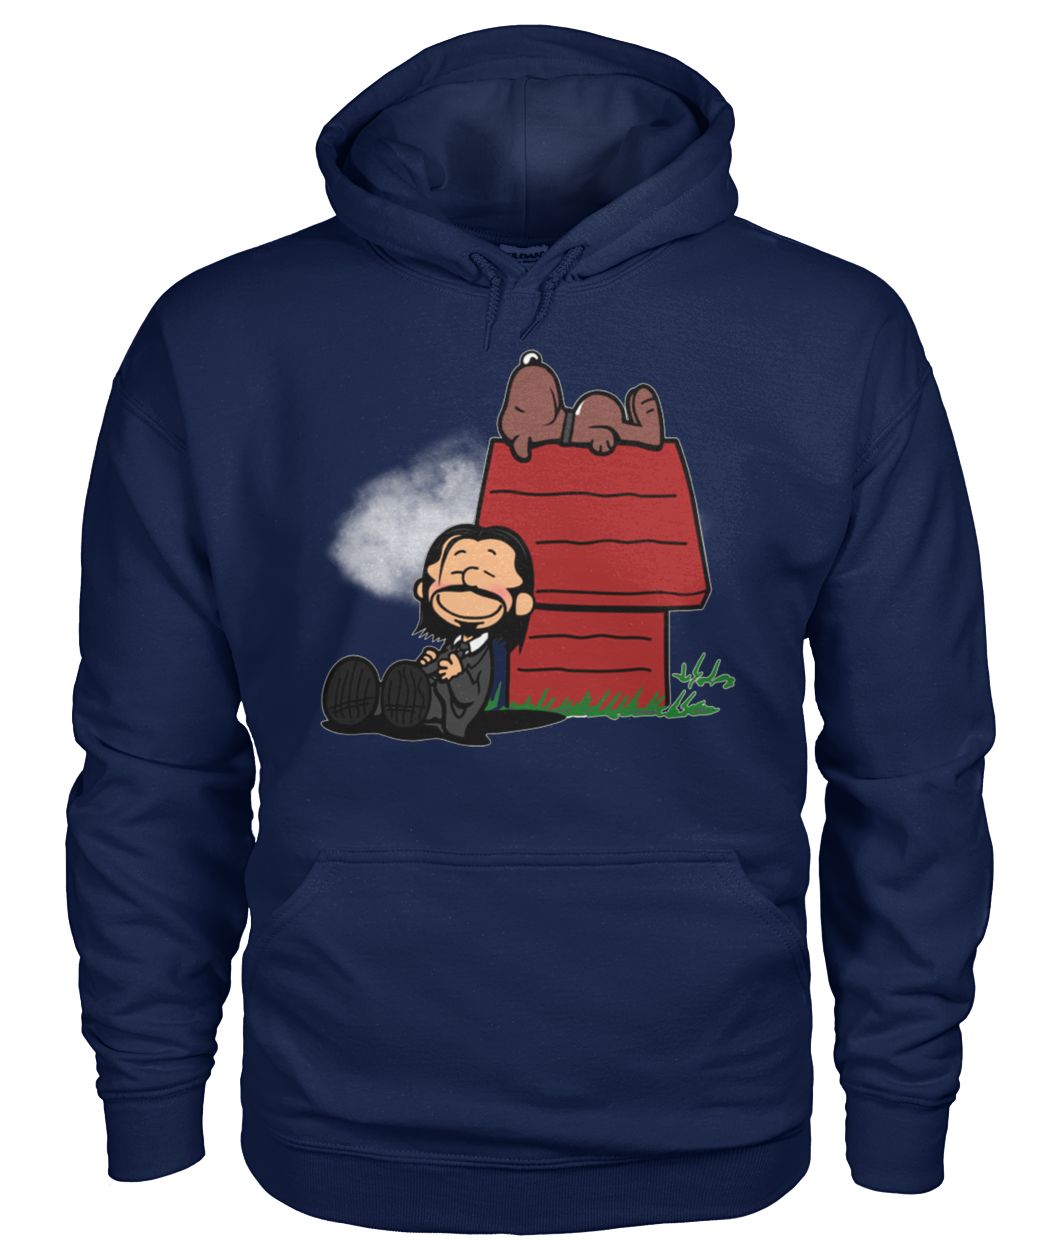 John wick and dog in the style of peanuts charlie brown and snoopy gildan hoodie